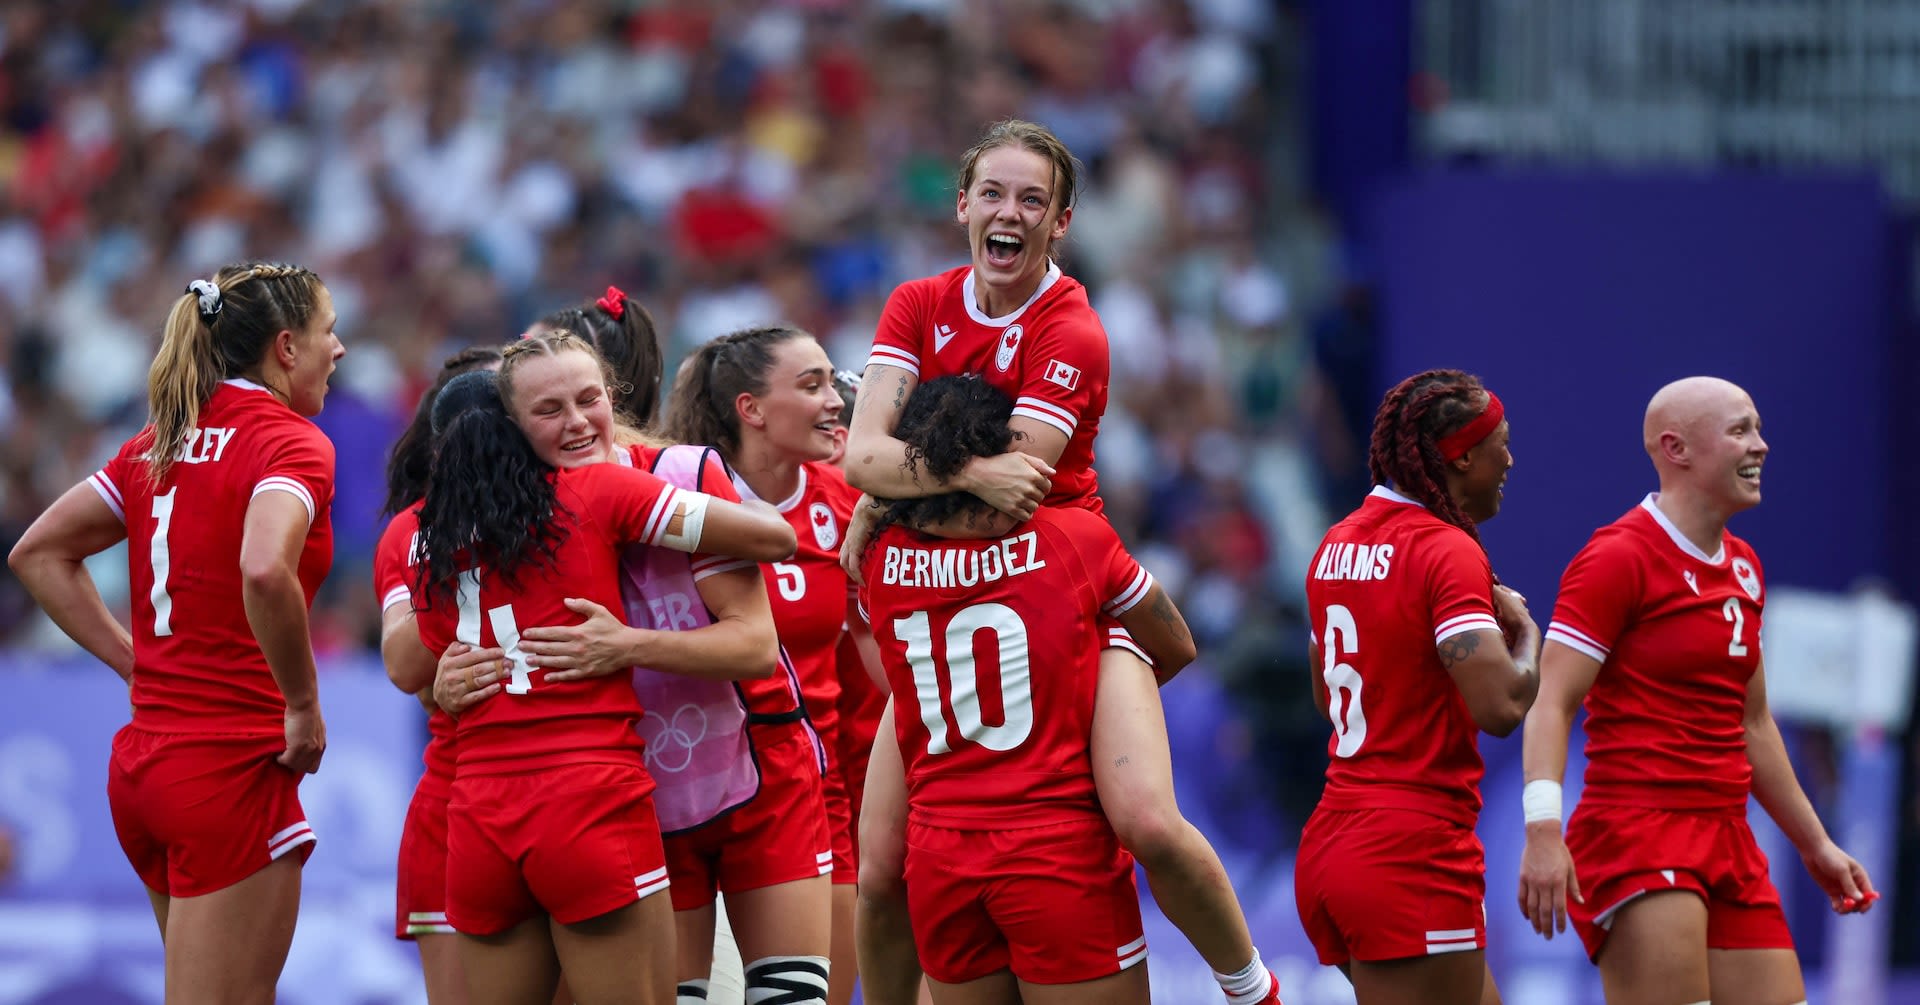 Rugby sevens-NZ beat remarkable Canada to take gold again